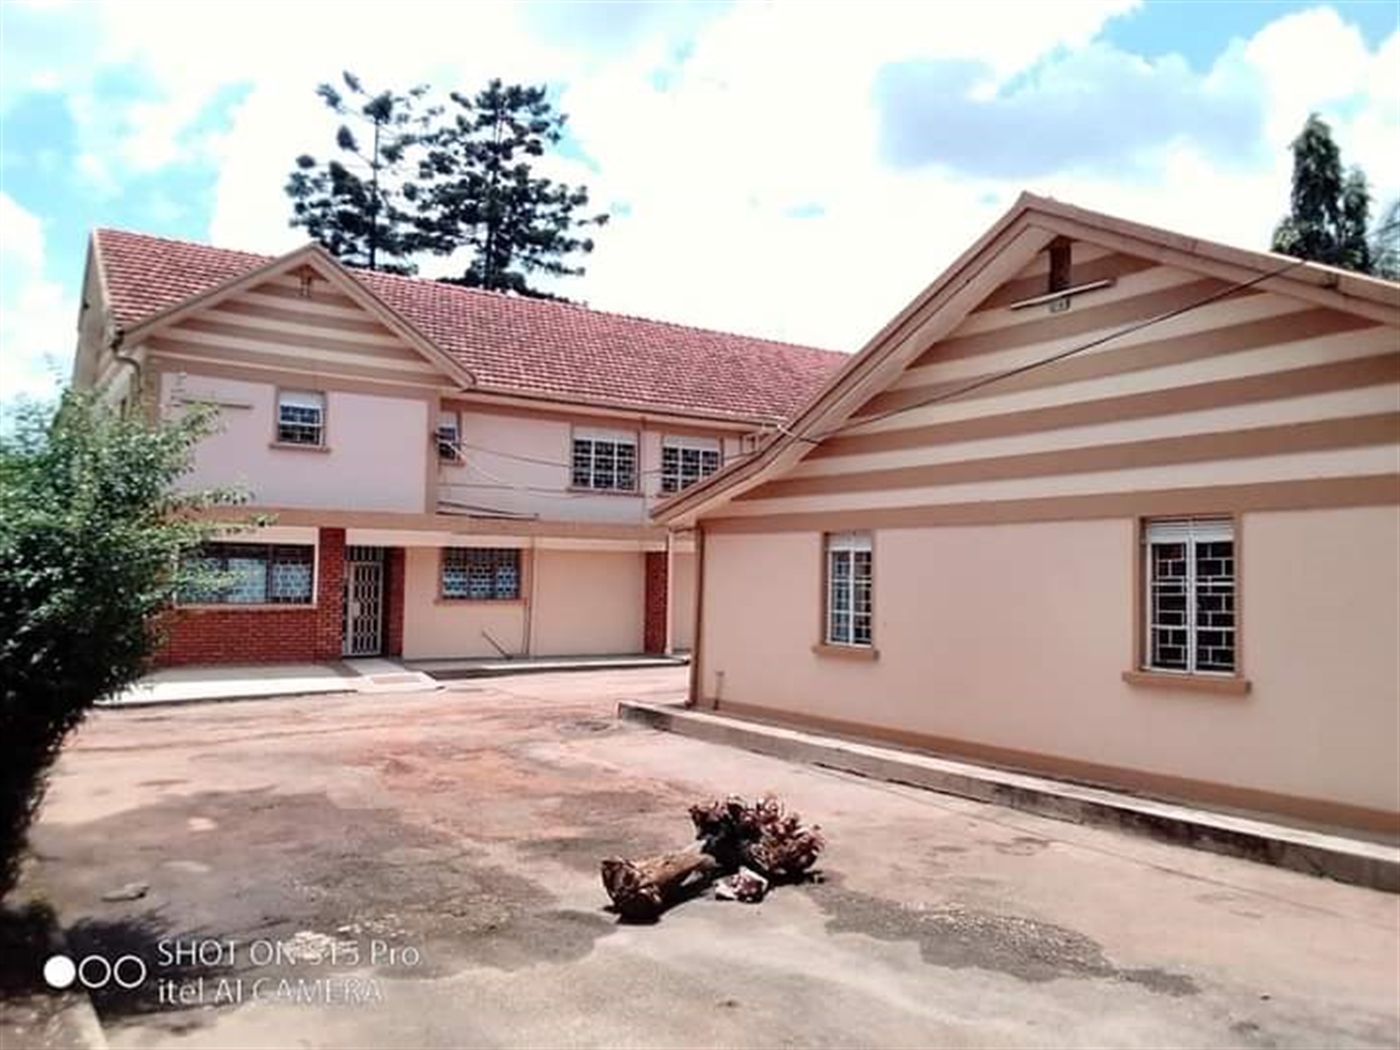 Office Space for rent in Bugolobi Kampala